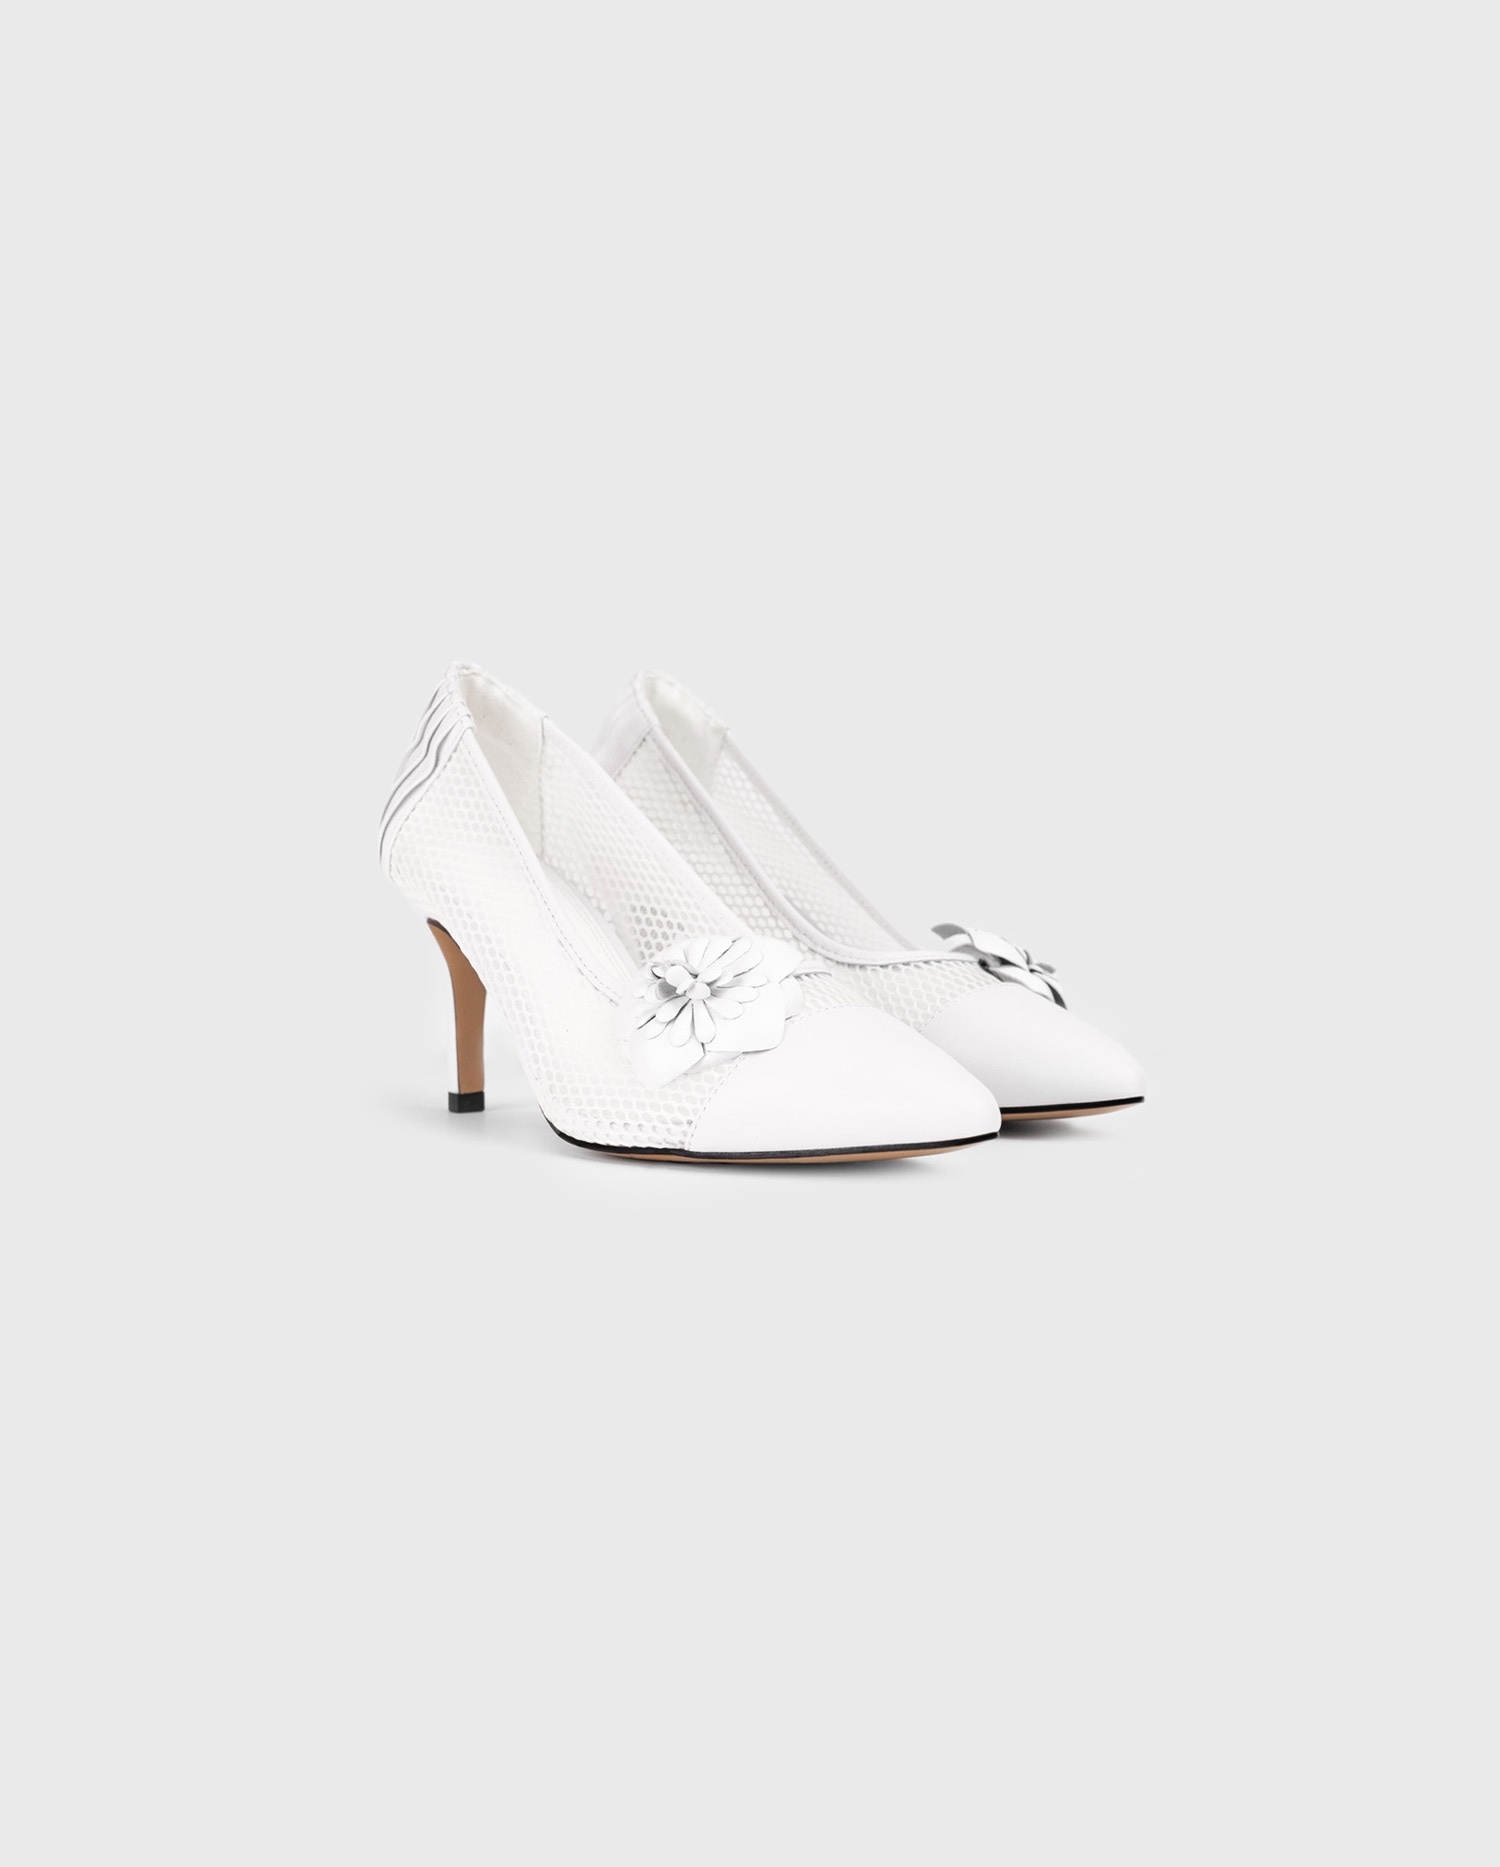 Discover the BASILIA white mesh heels with flowers from designer ANNE FONTAINE